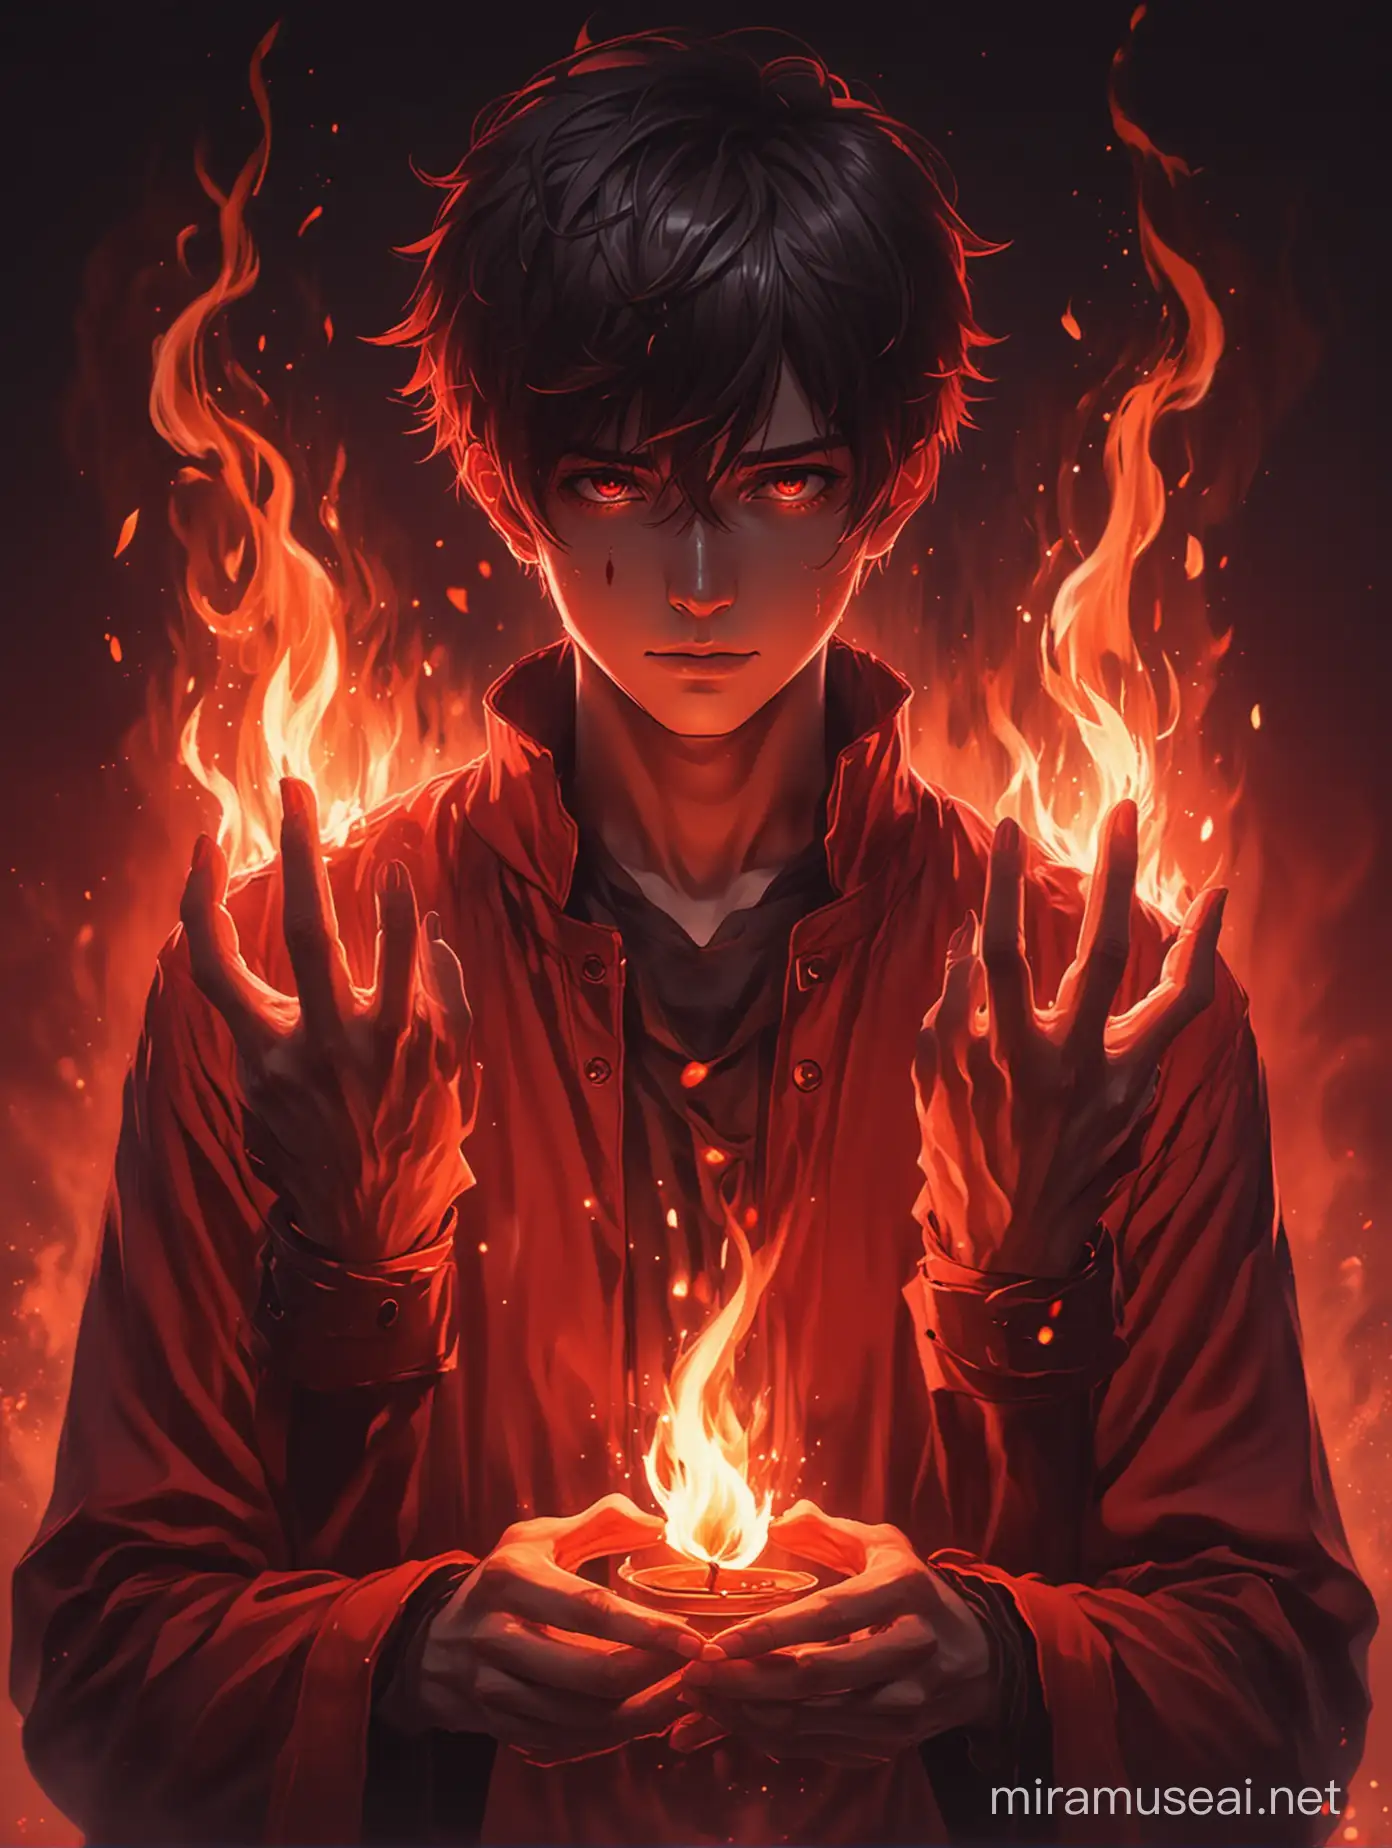 Enigmatic guy Anime Character Evoking Dark Love and Manipulation in Red Hues holding mini fire with both hands.  